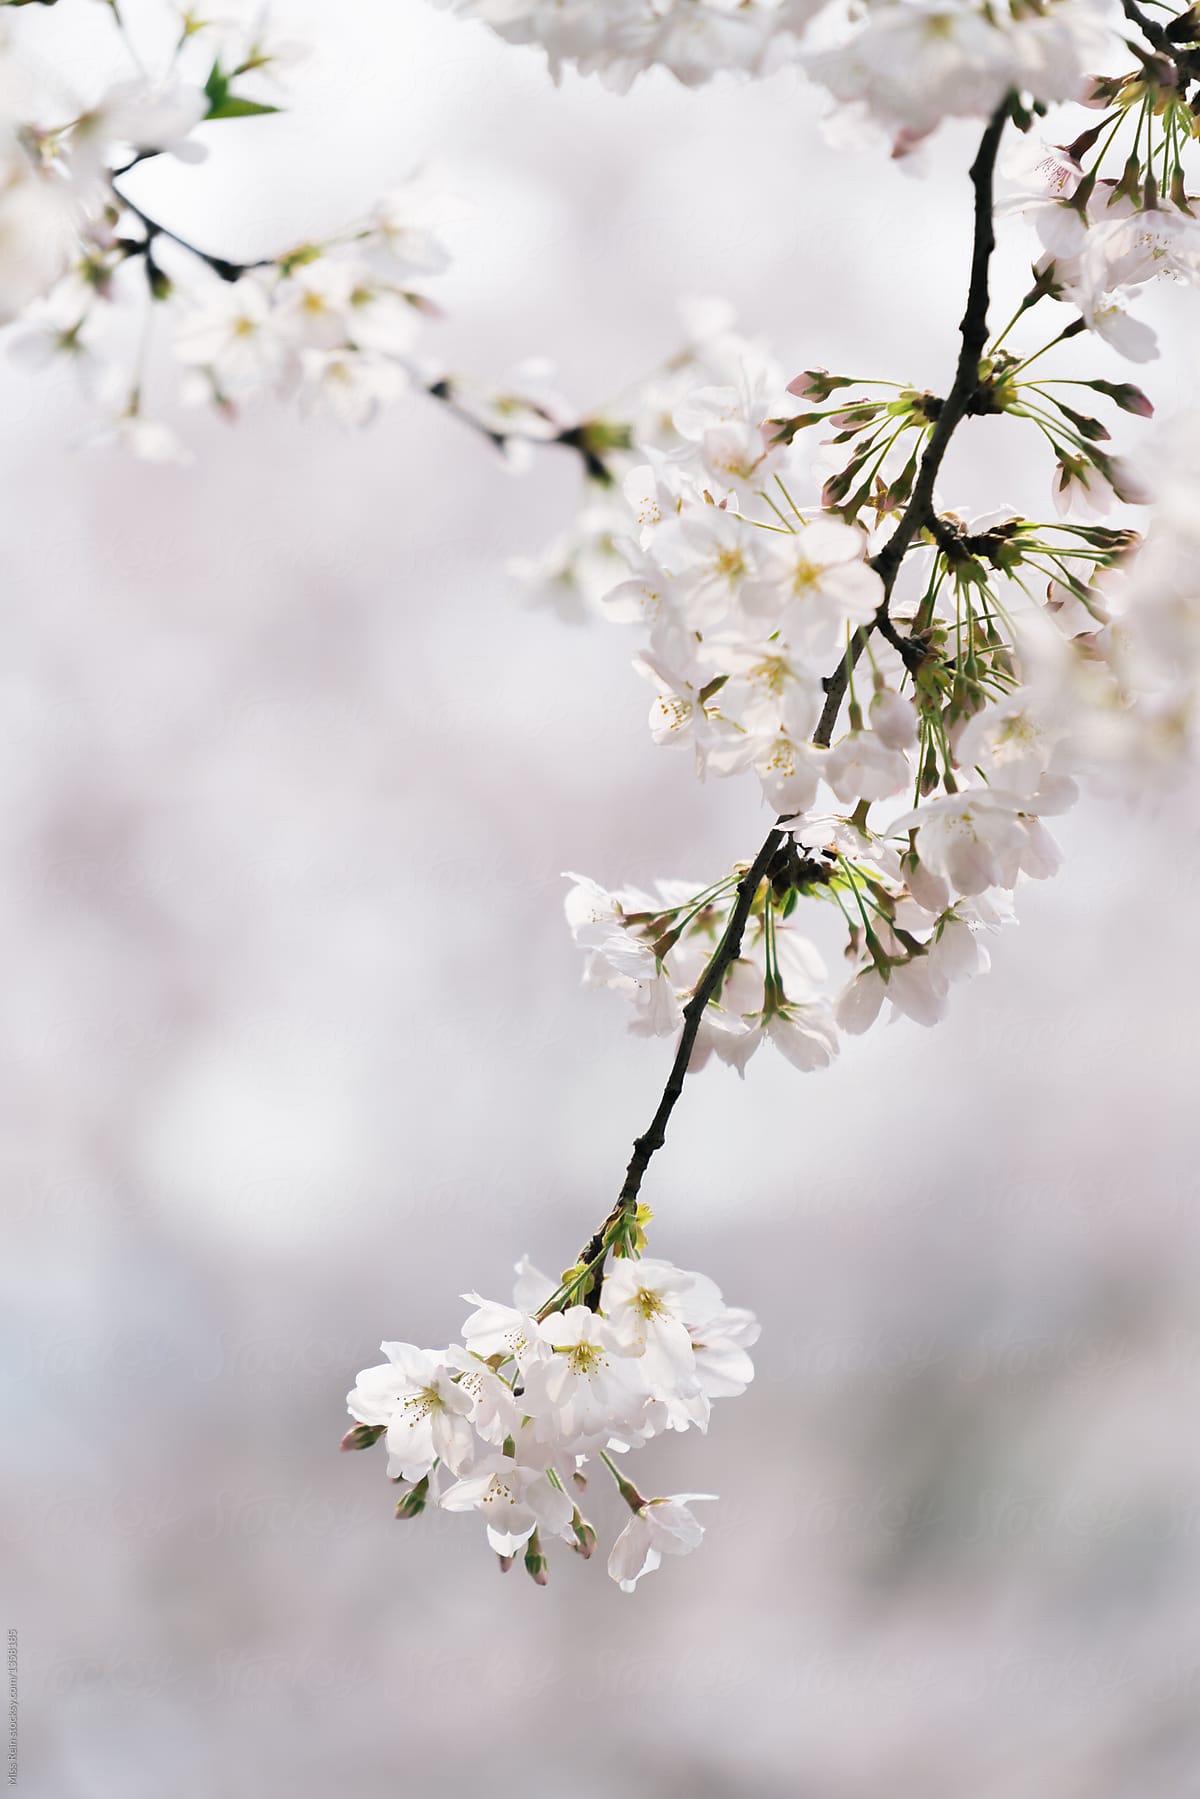 Close-Up Of White Apple Blossoms In Spring | Stocksy United